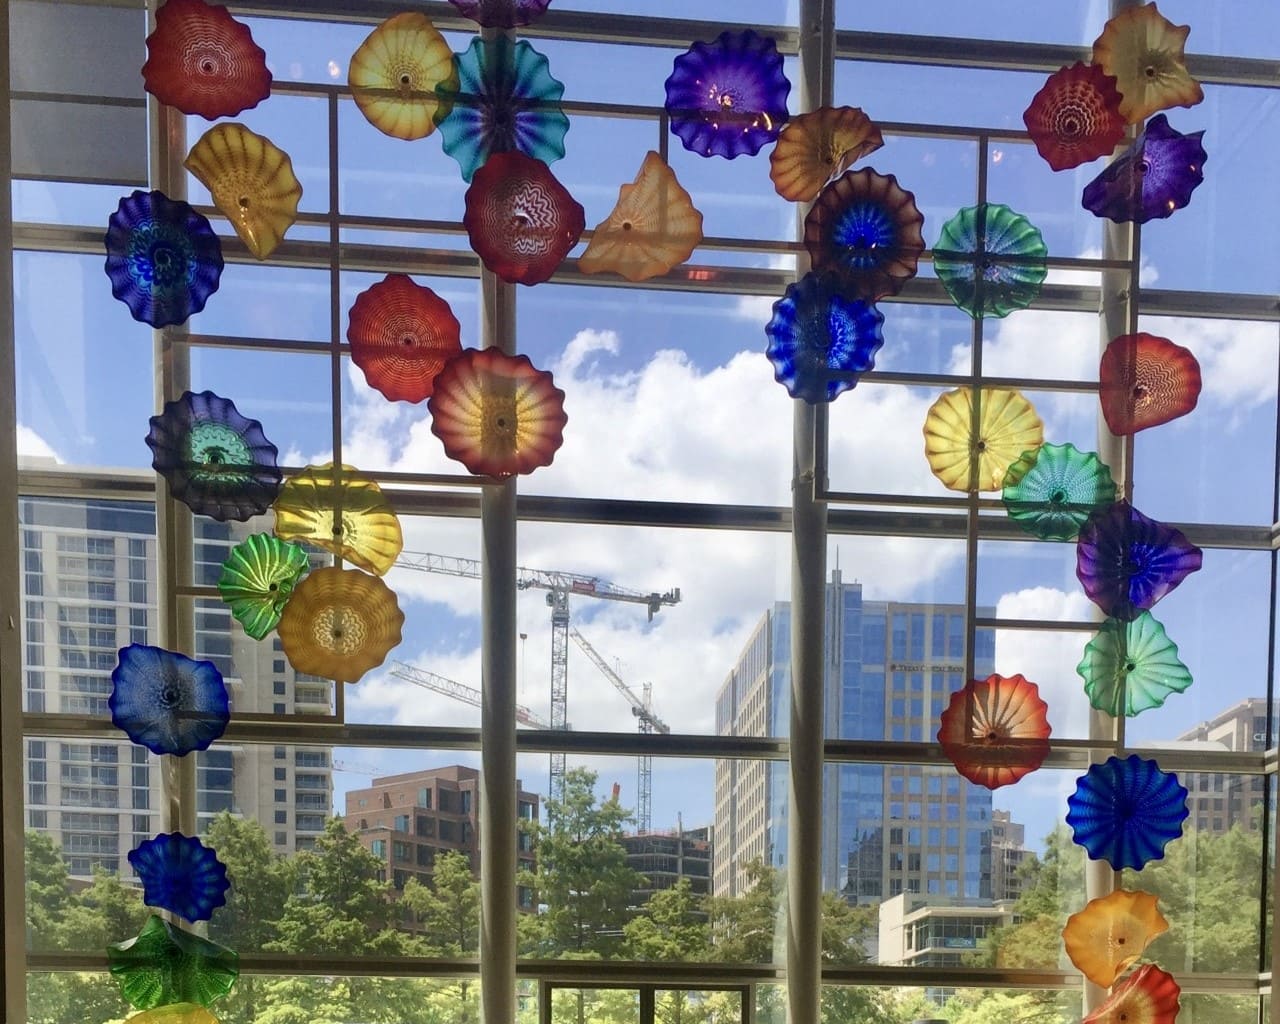 The Dallas Museum of Art has colorful glass artwork in the cafe.